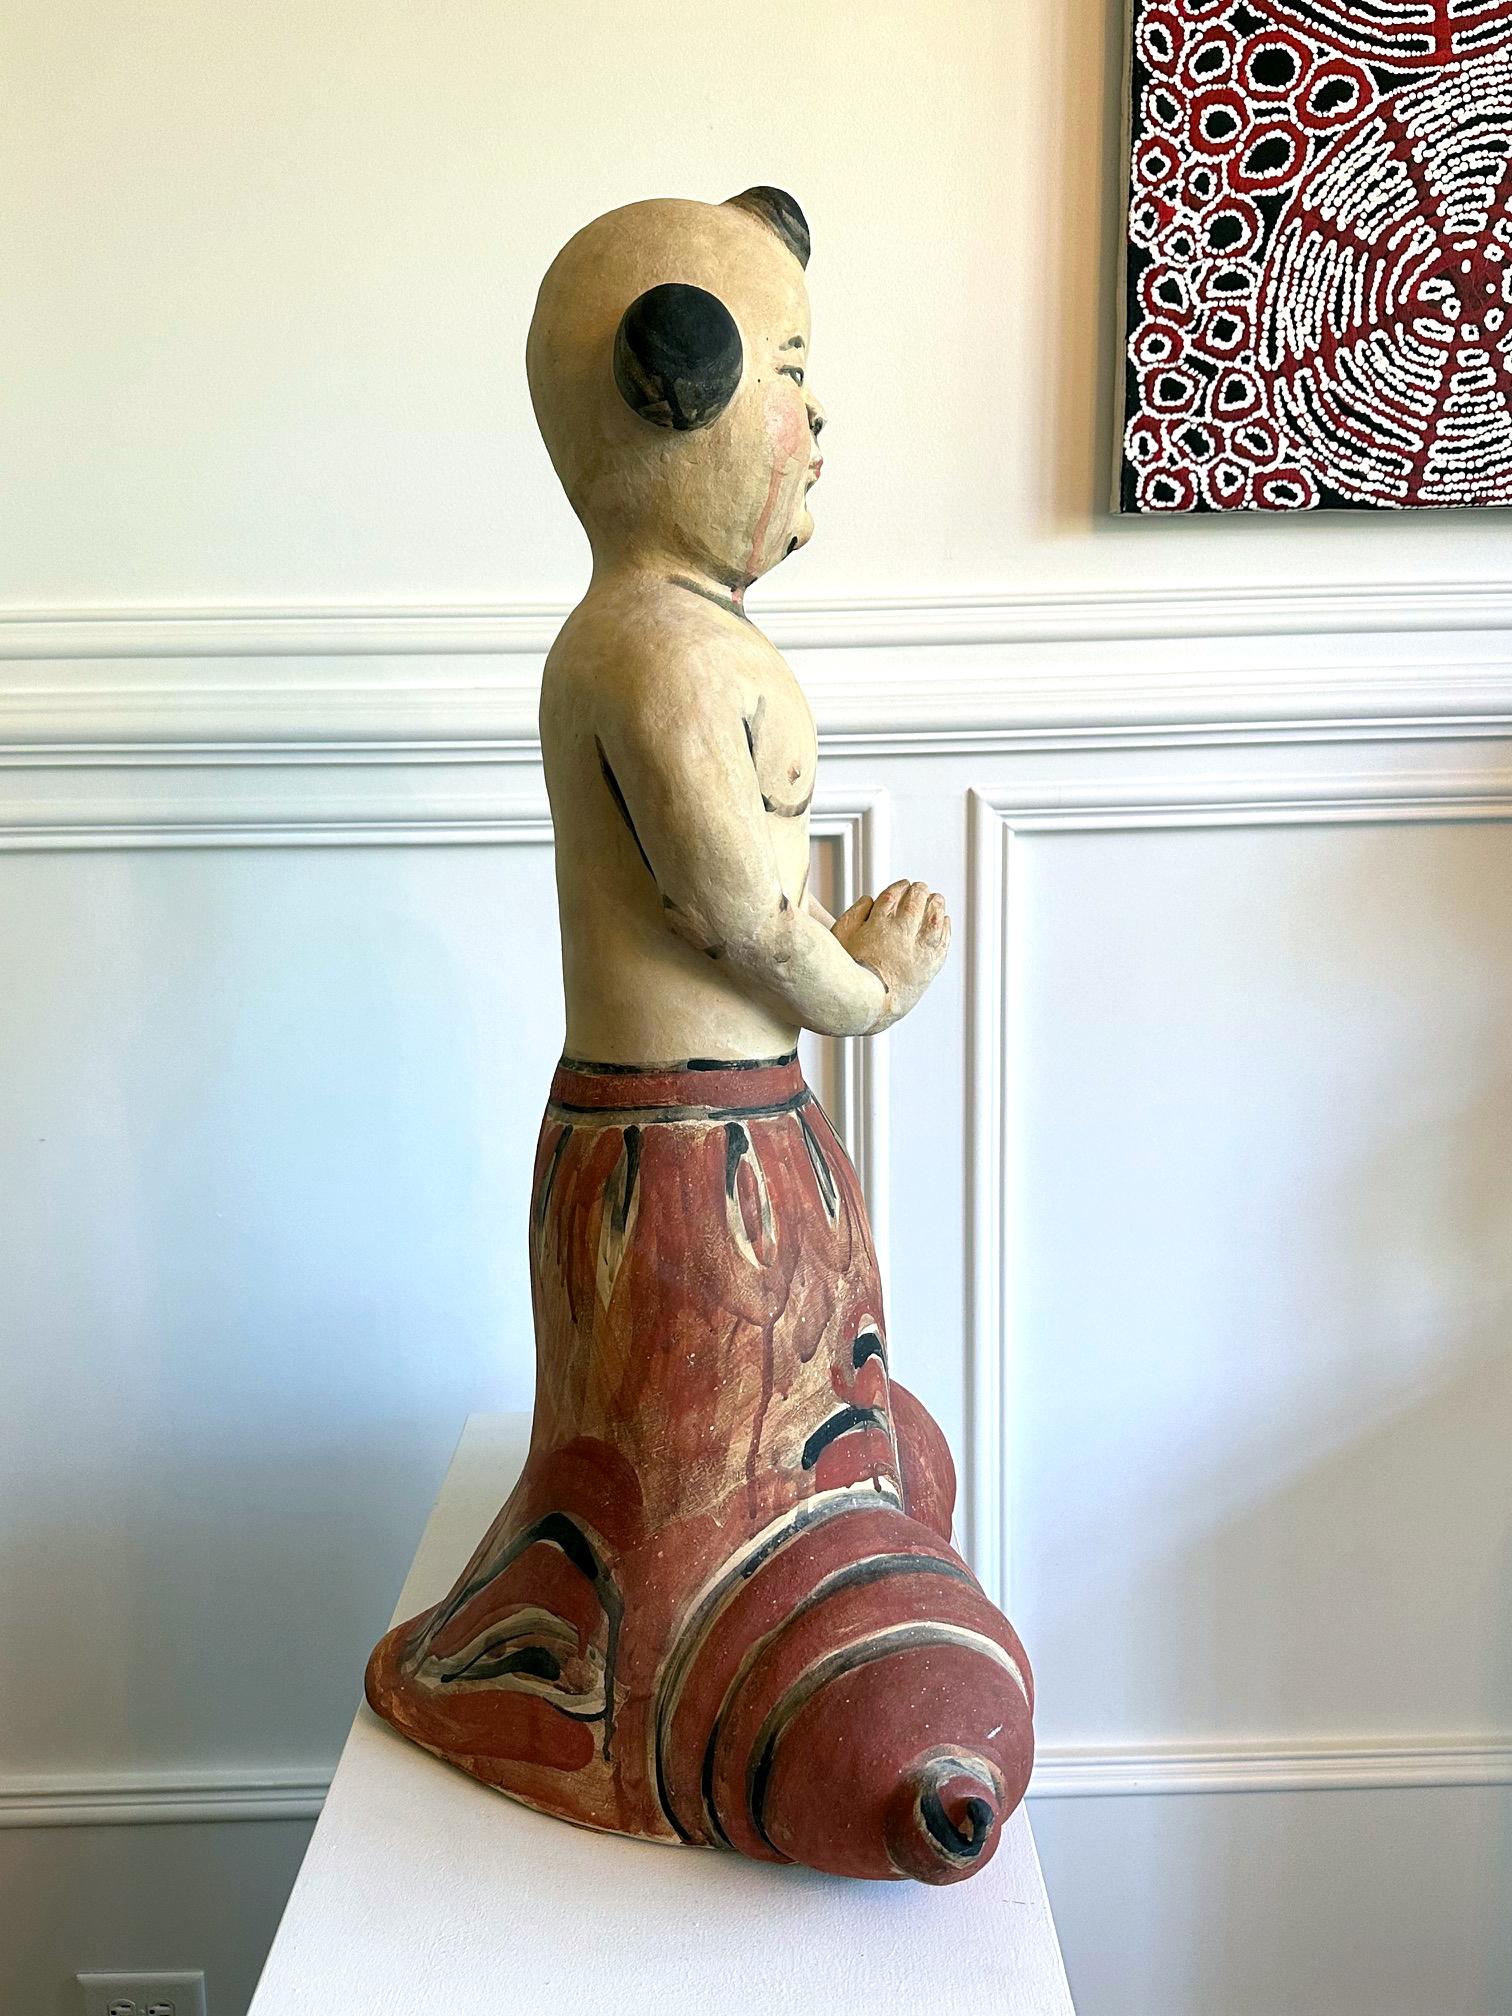 Hand-Painted Ceramic Figurative Sculpture by Akio Takamori Published For Sale